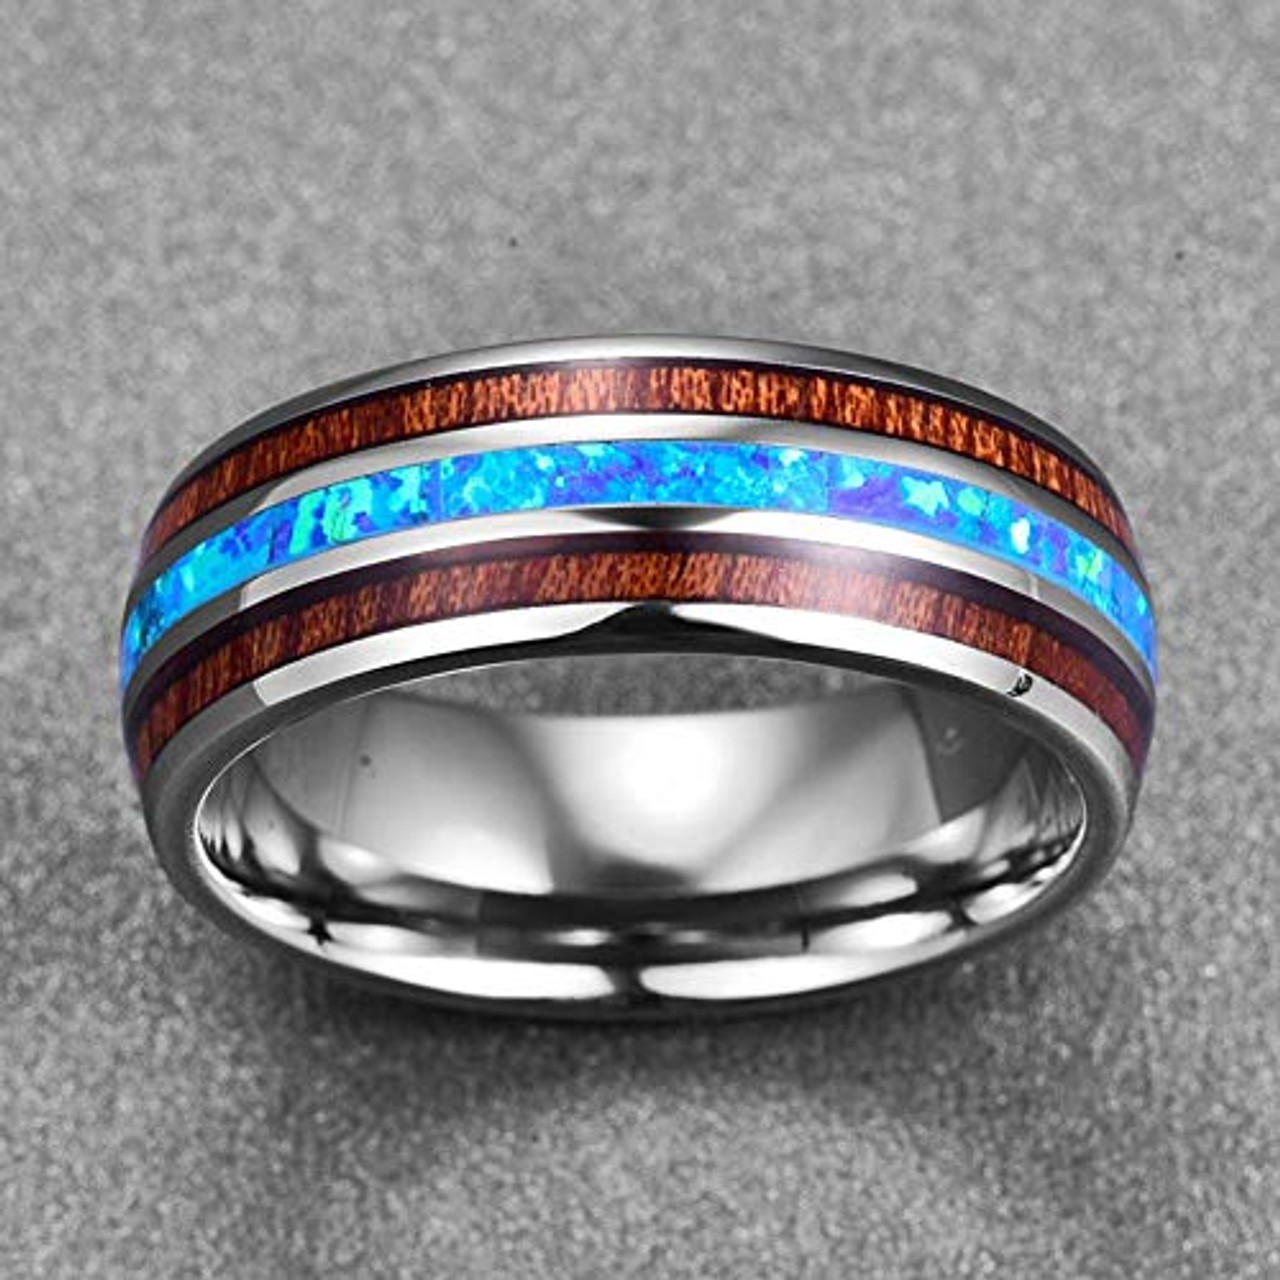 (8mm) Unisex or Men's Tungsten Carbide Wedding Ring Band - Silver Tone Wood and Sea Blue Opal Inlay Ring. 